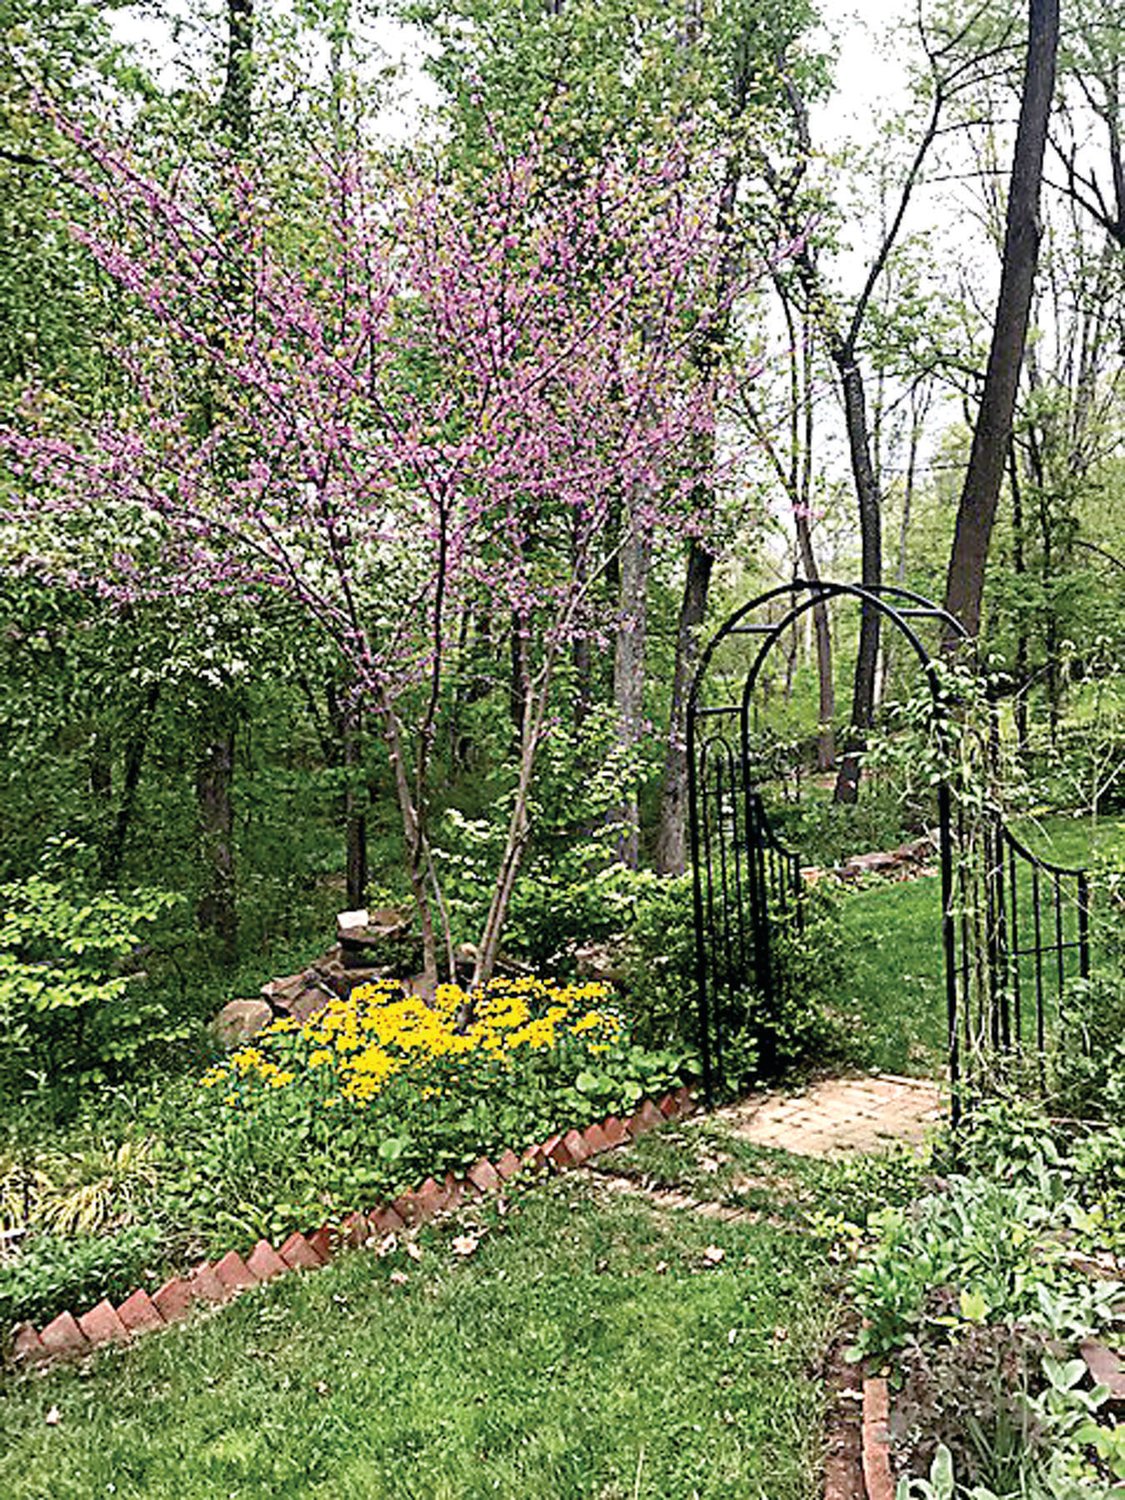 The garden path was featured on the 2018 “Designed for Nature” Garden Tour. This year’s event takes place June 19.